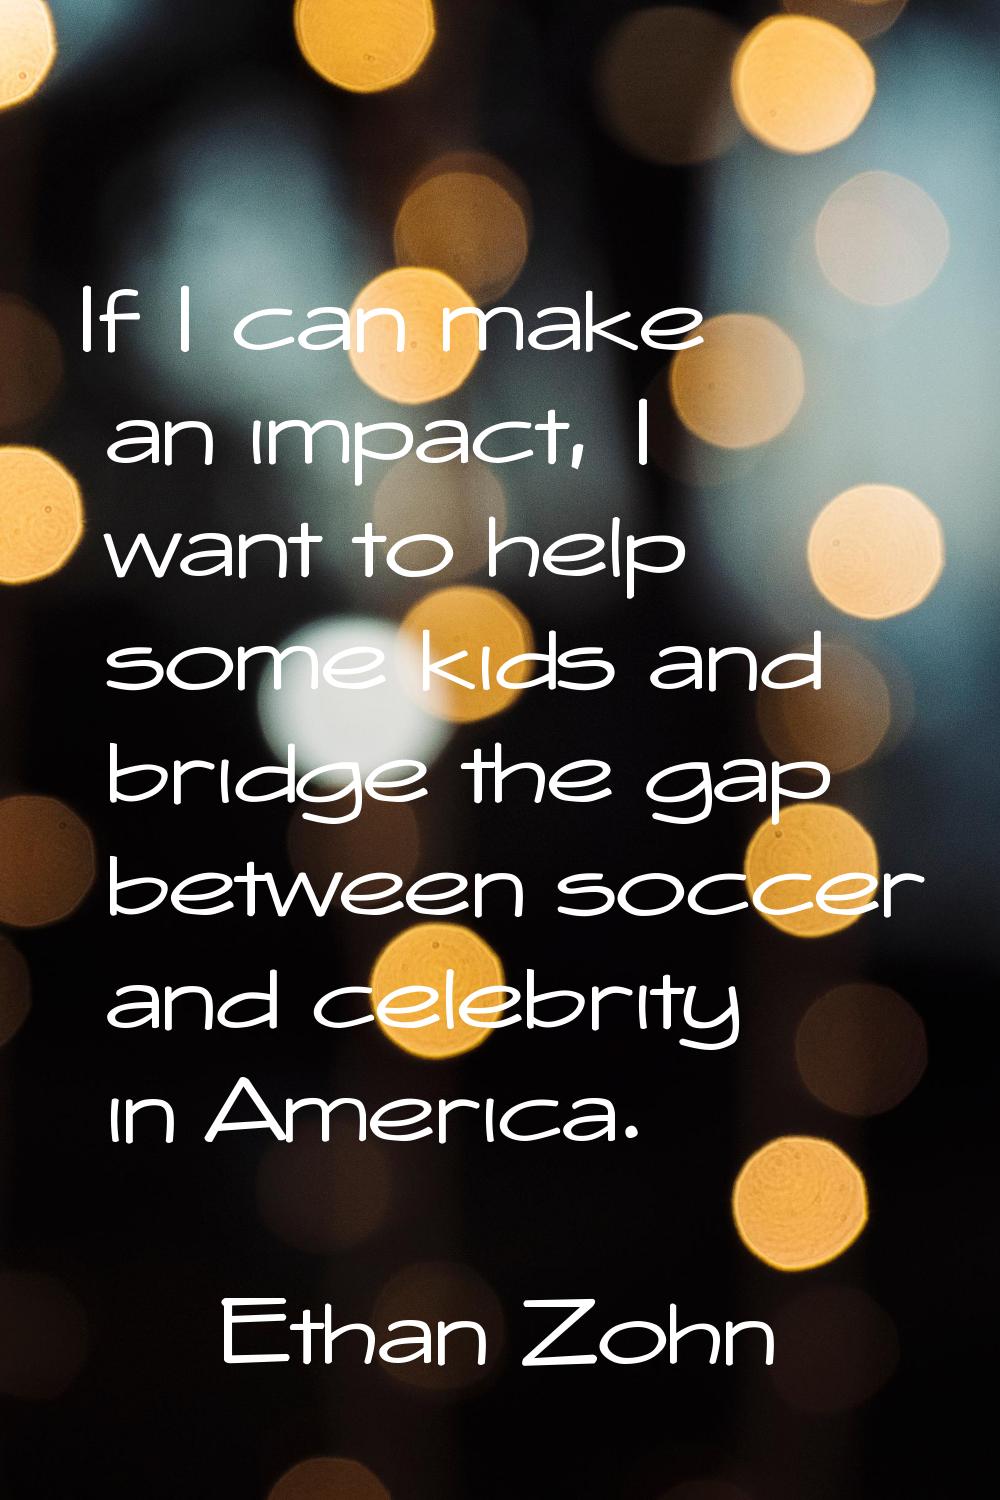 If I can make an impact, I want to help some kids and bridge the gap between soccer and celebrity i